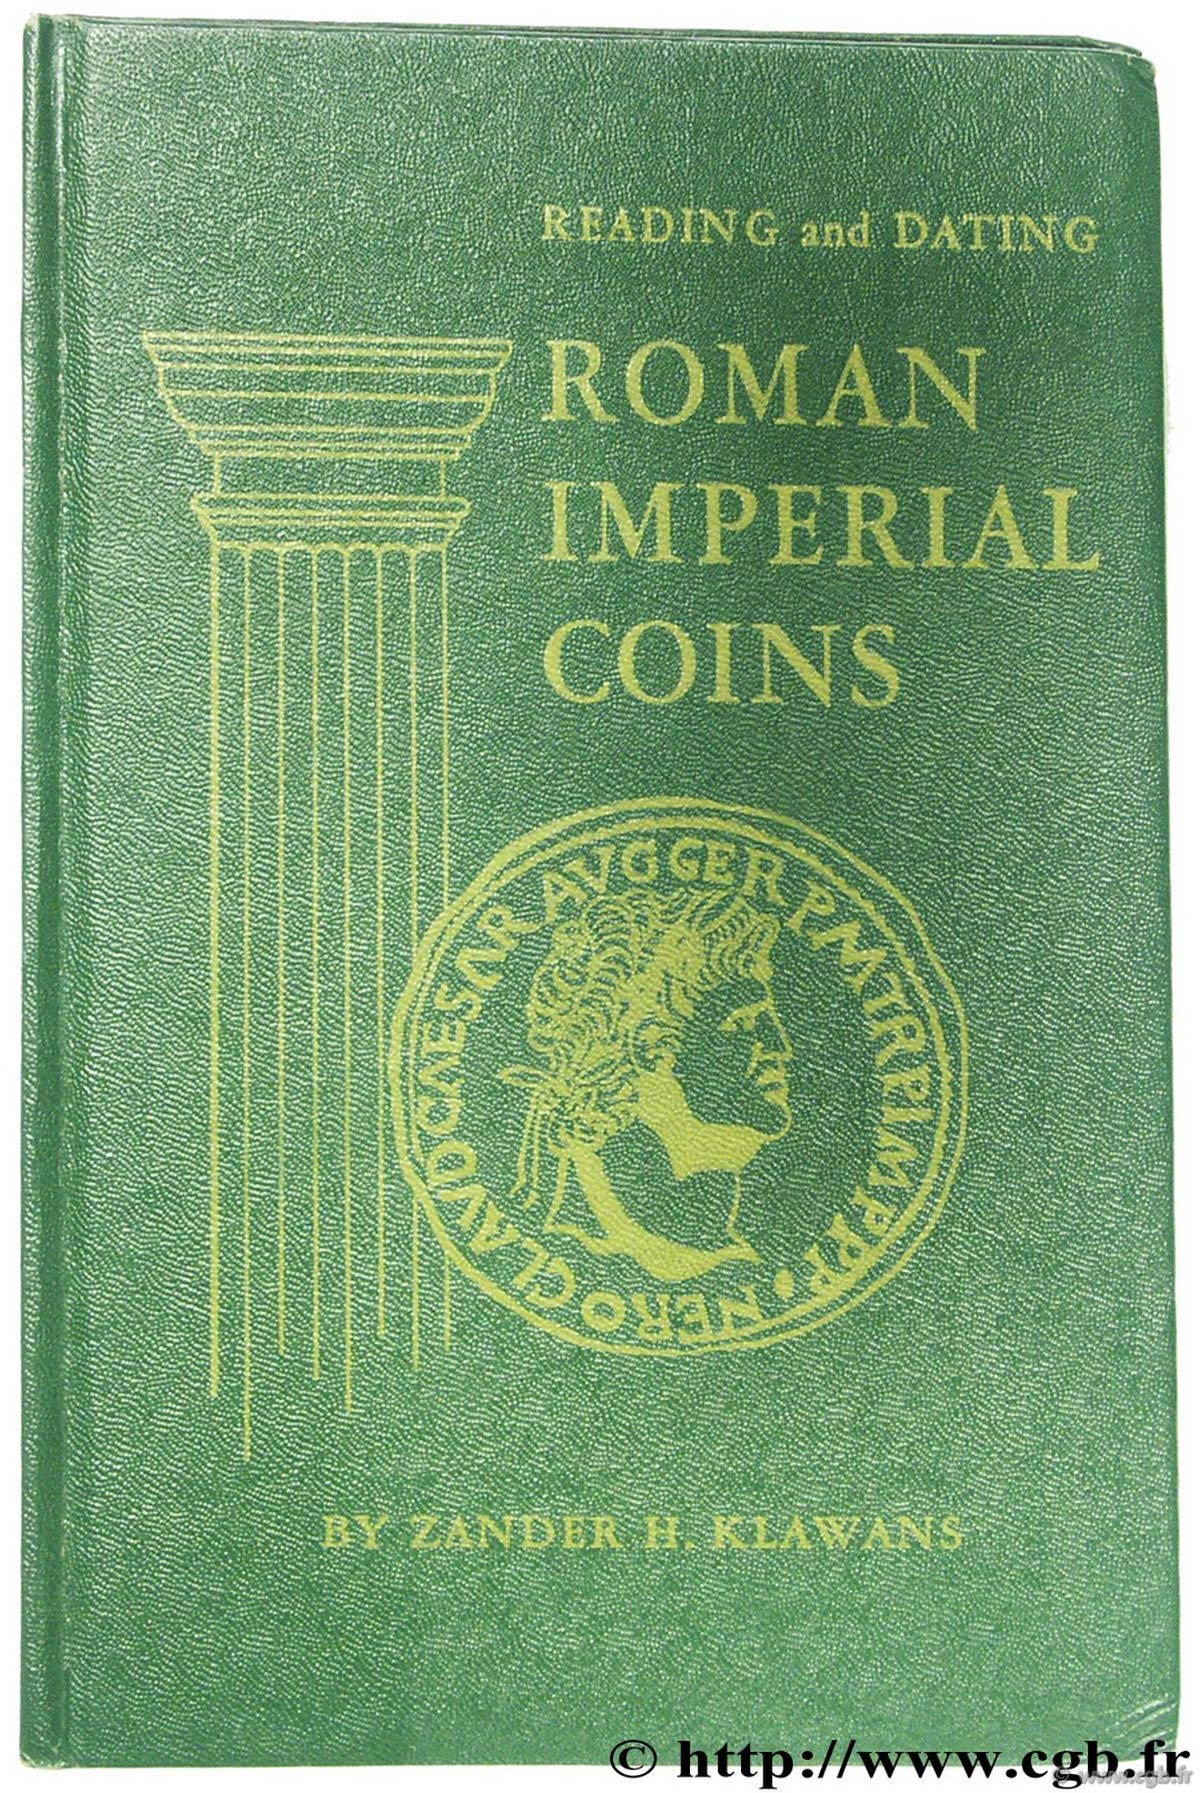 Roman Imperial Coins fourth edition KLAWANS Z.-H.